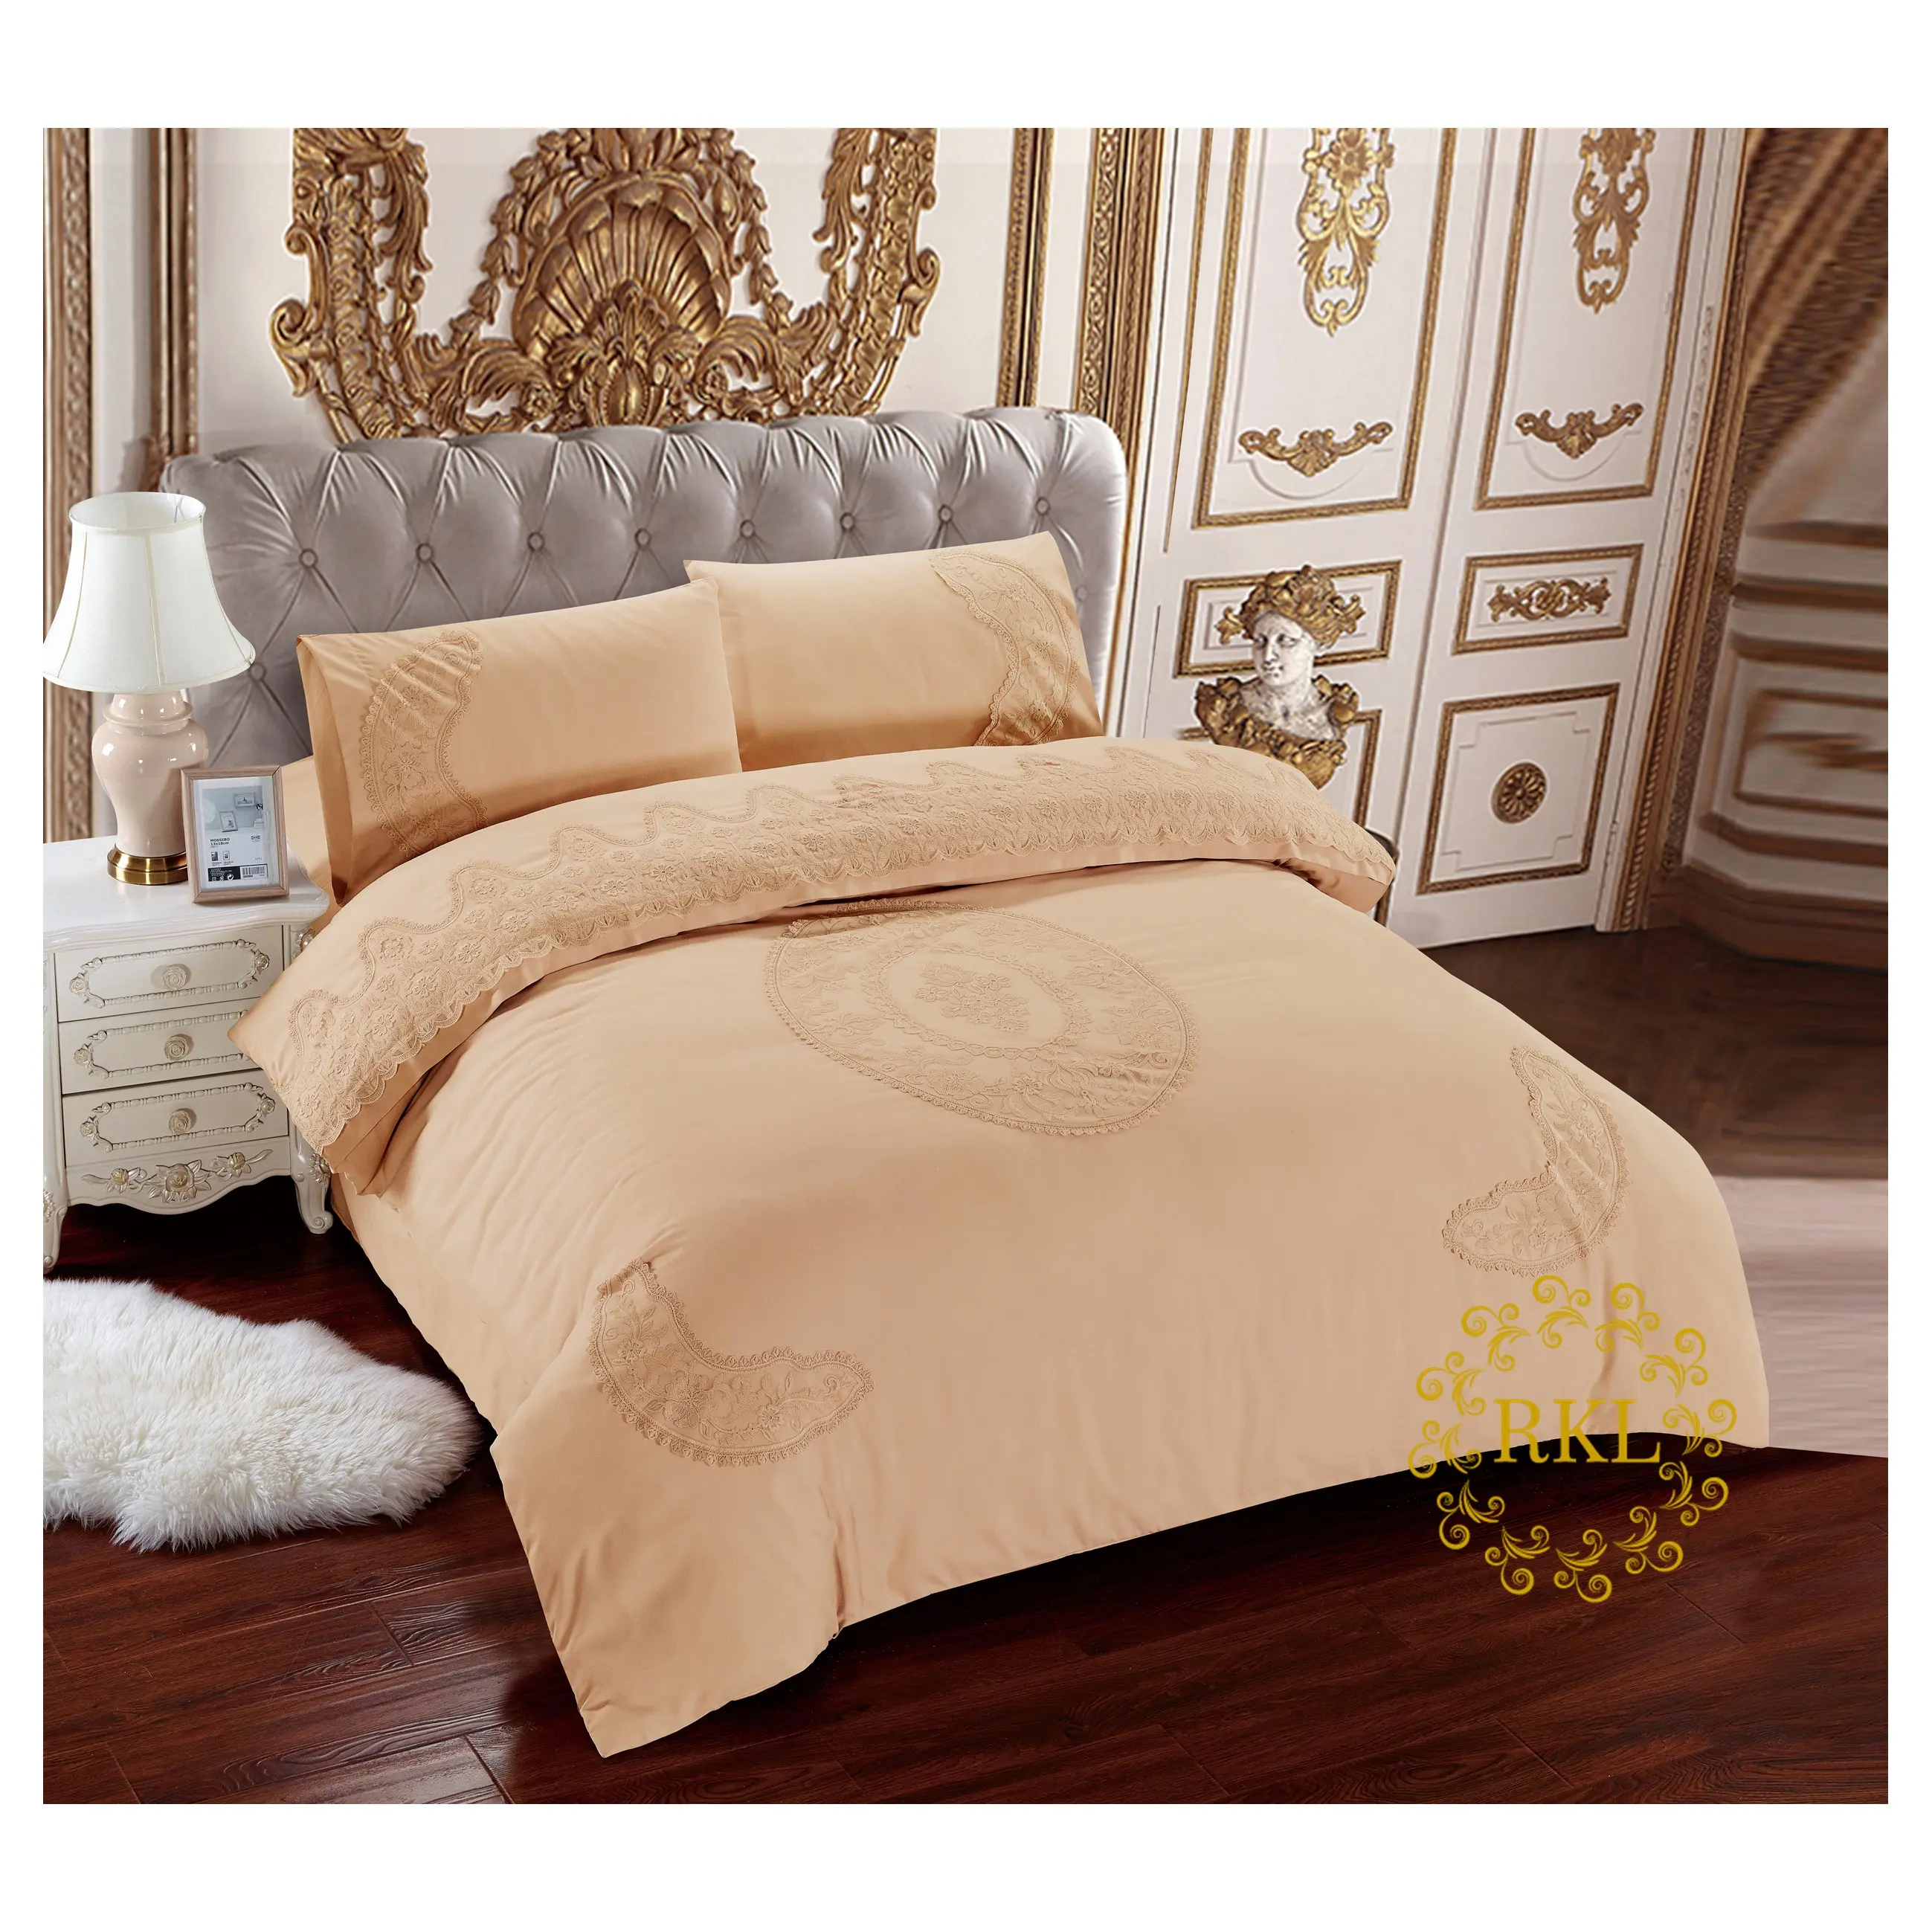 Cheapest Hotel Bedroom Customize Bedding Set 100% Polyester Microfiber 3 Piece Bed Sheets Set